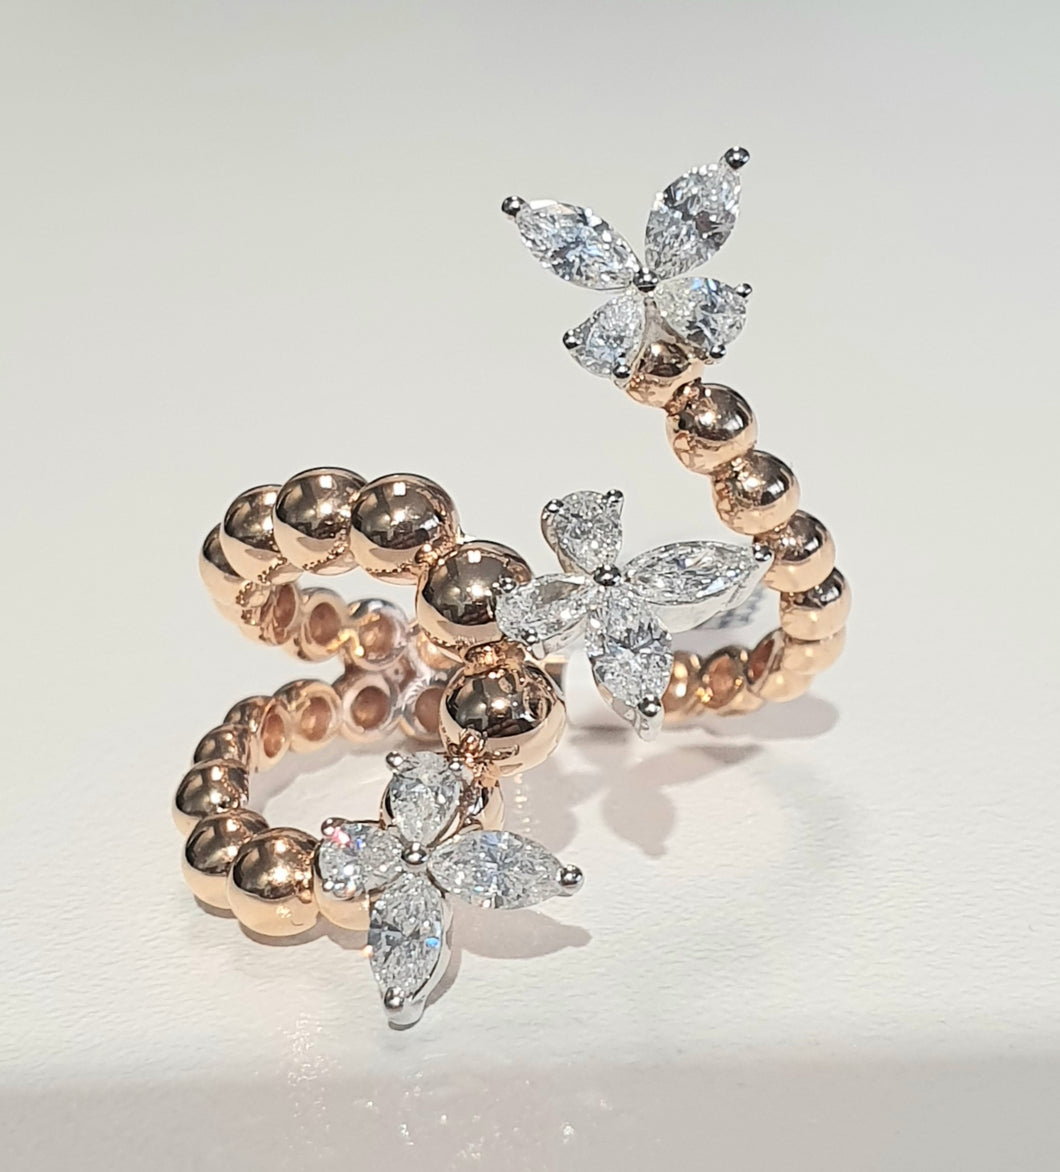 0.55cts [6] Marquise Cut Diamonds | 0.30cts [6] Pear Cut Diamonds | Designer Open Shank Ring | 18kt Rose and White Gold